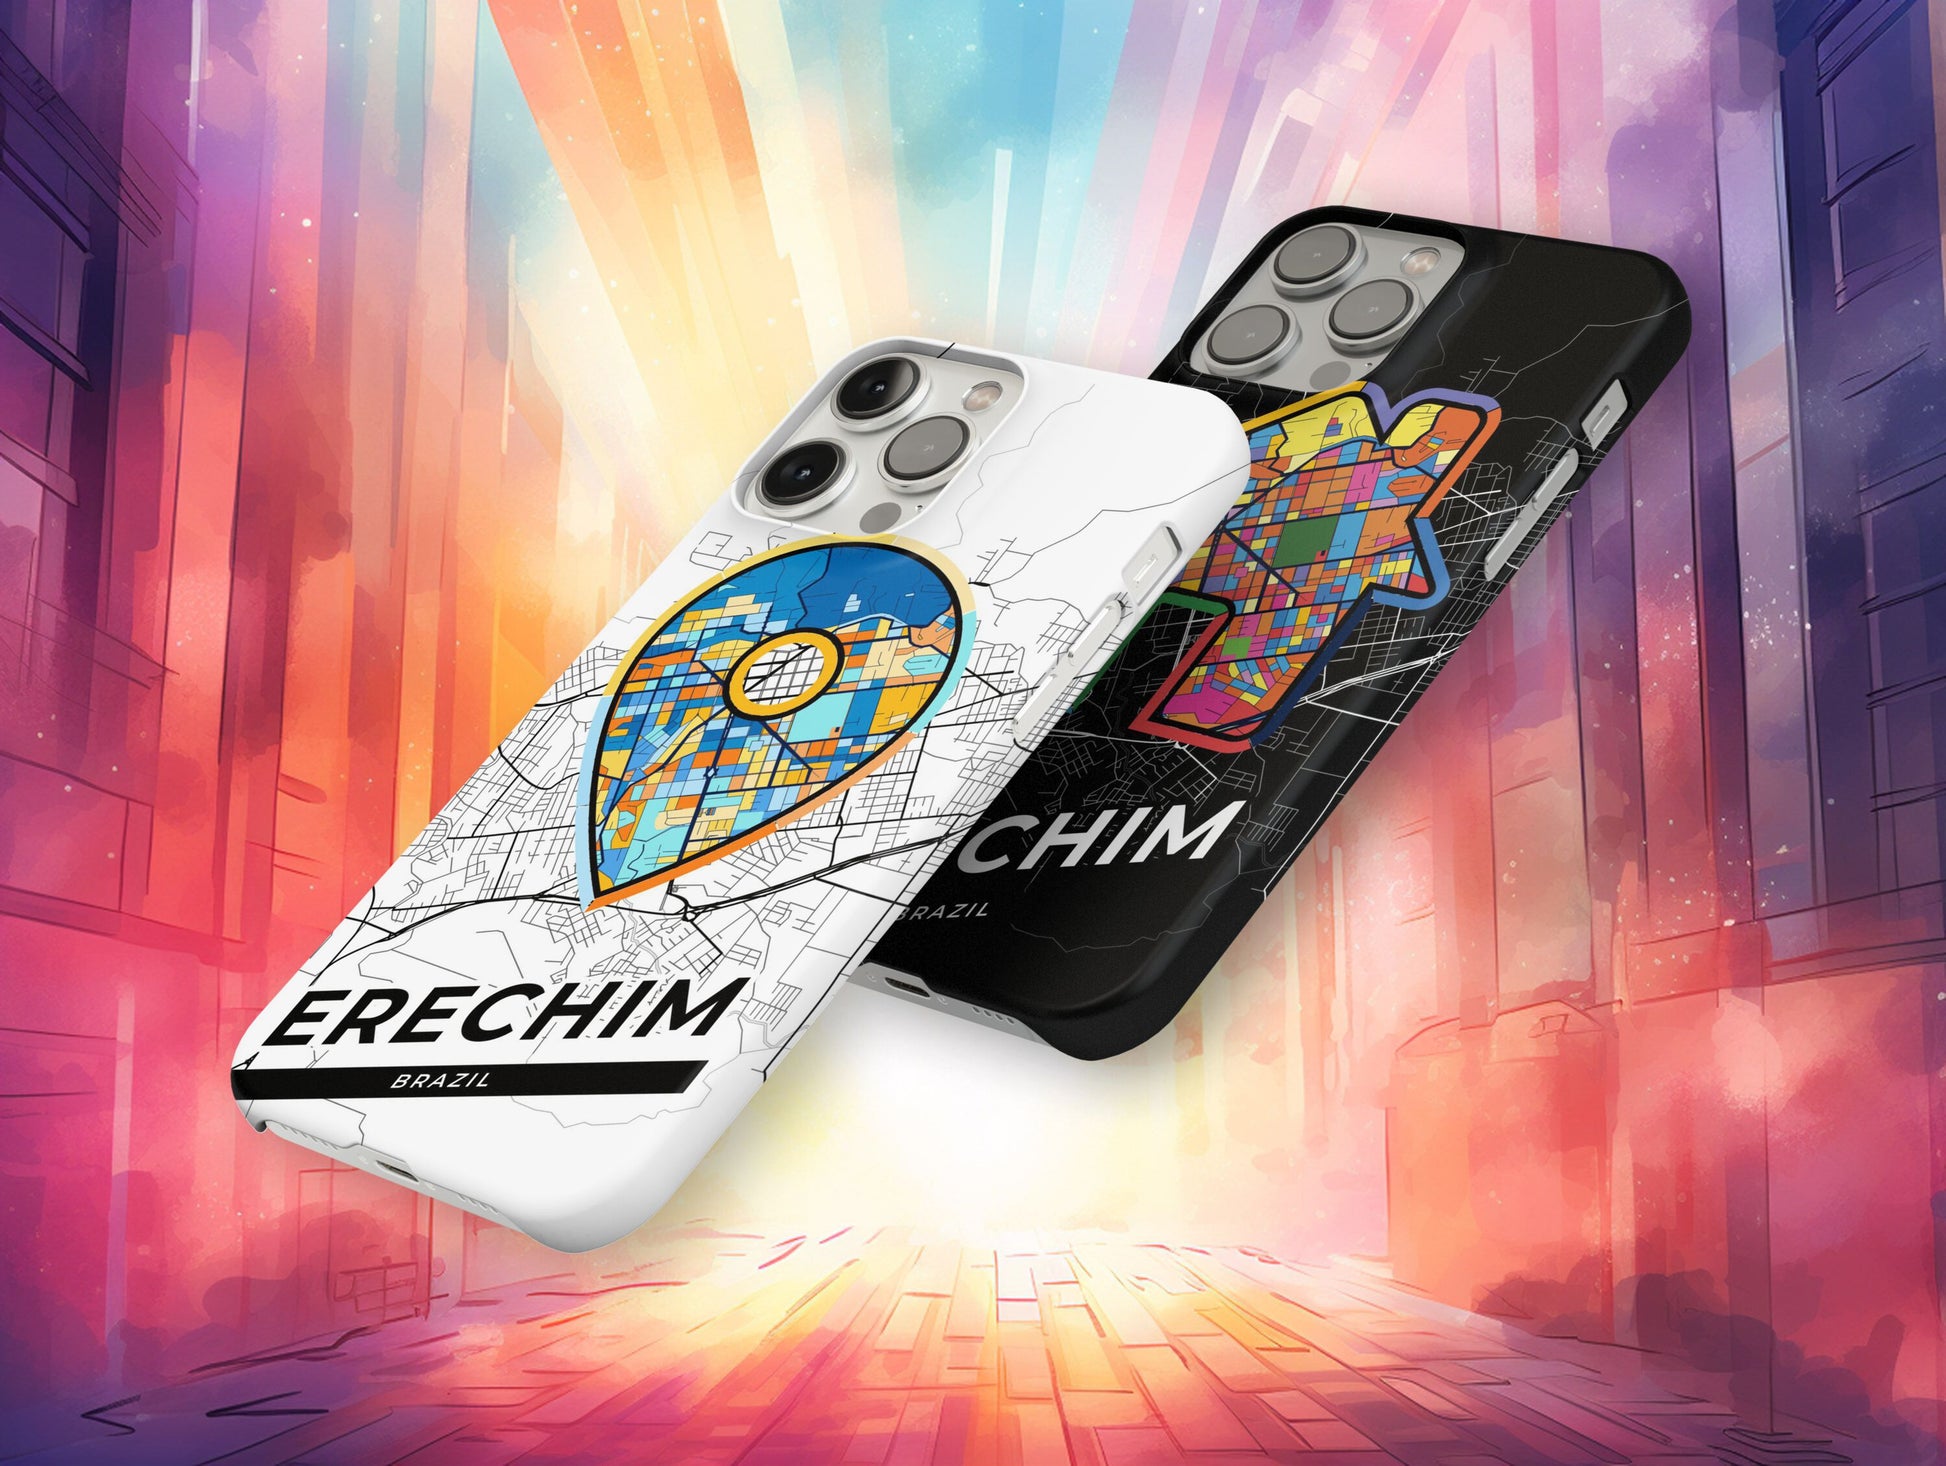 Erechim Brazil slim phone case with colorful icon. Birthday, wedding or housewarming gift. Couple match cases.